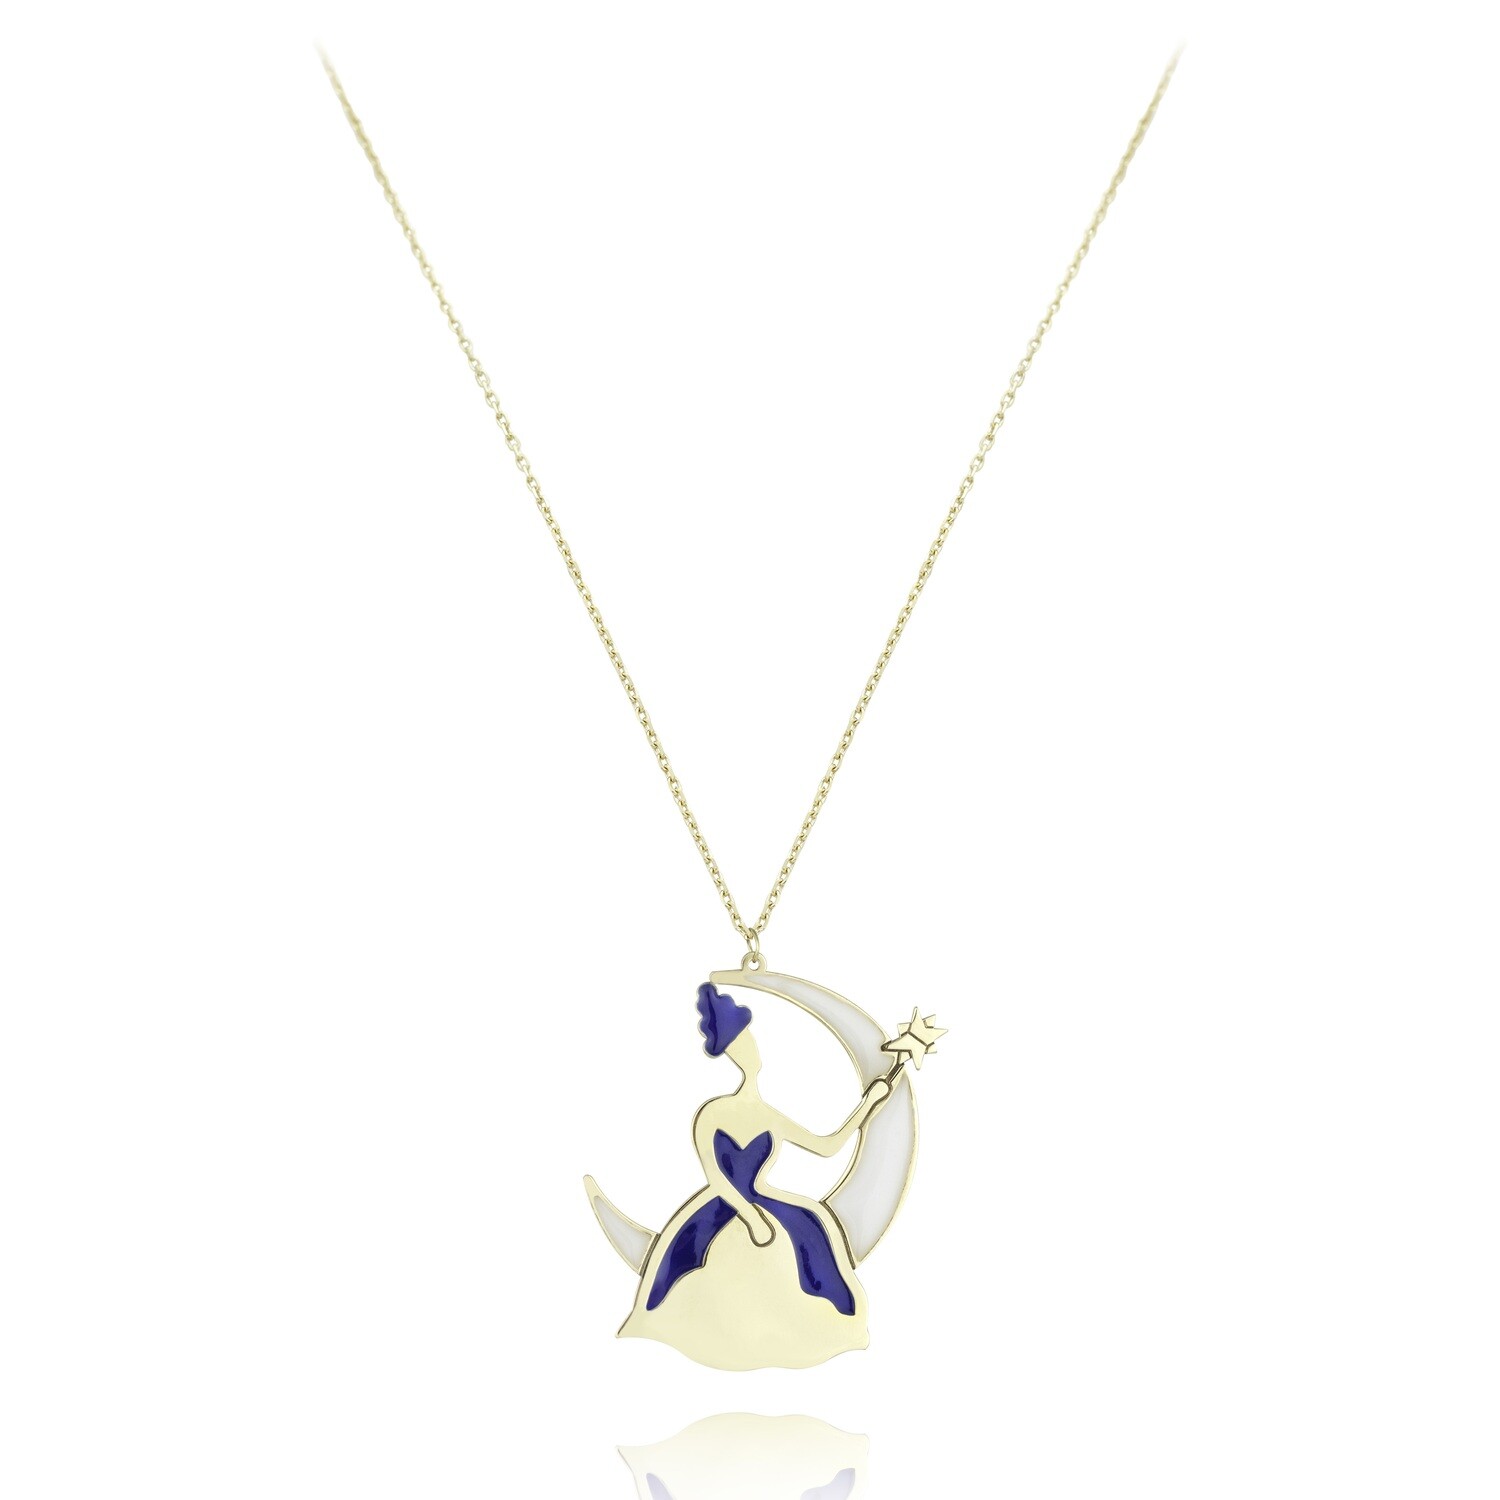 Fairy Tale Gold Necklace with Enamels